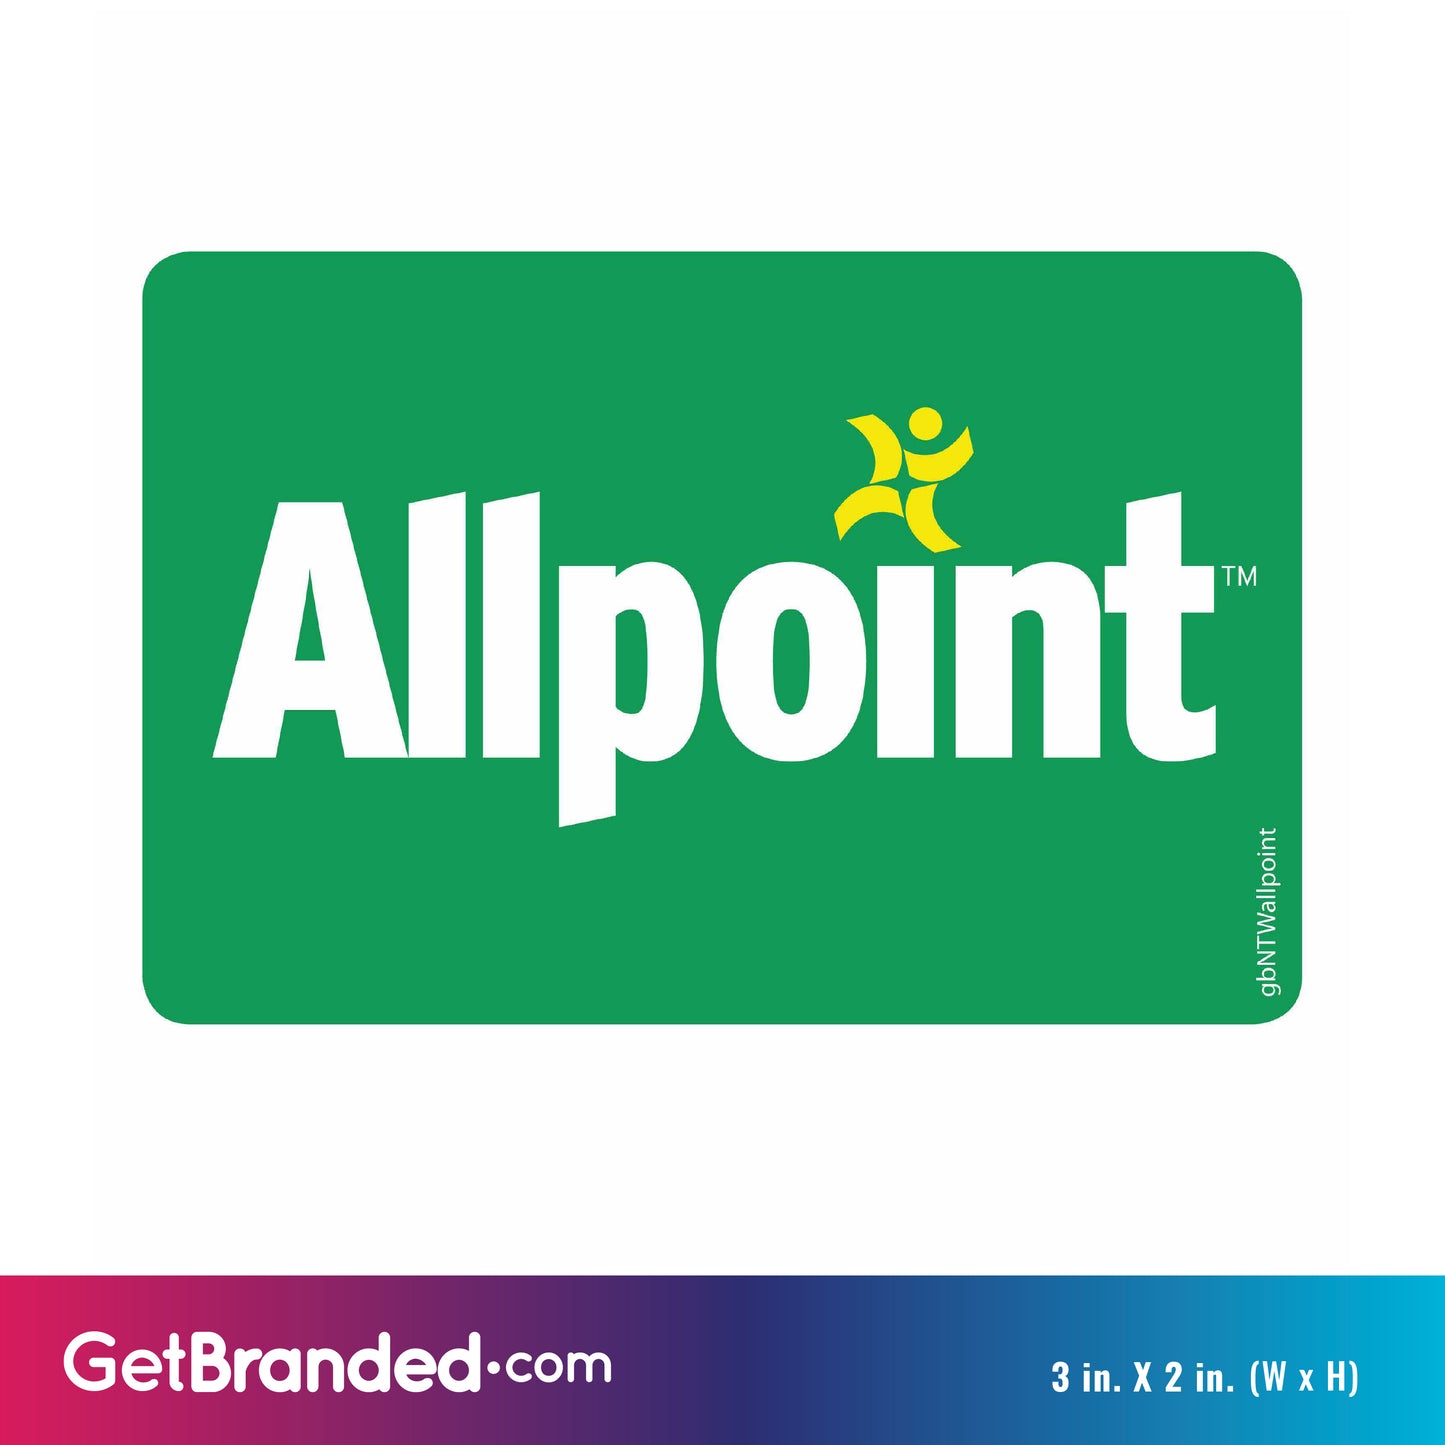 Single Network ATM Decal, Allpoint  size guide.